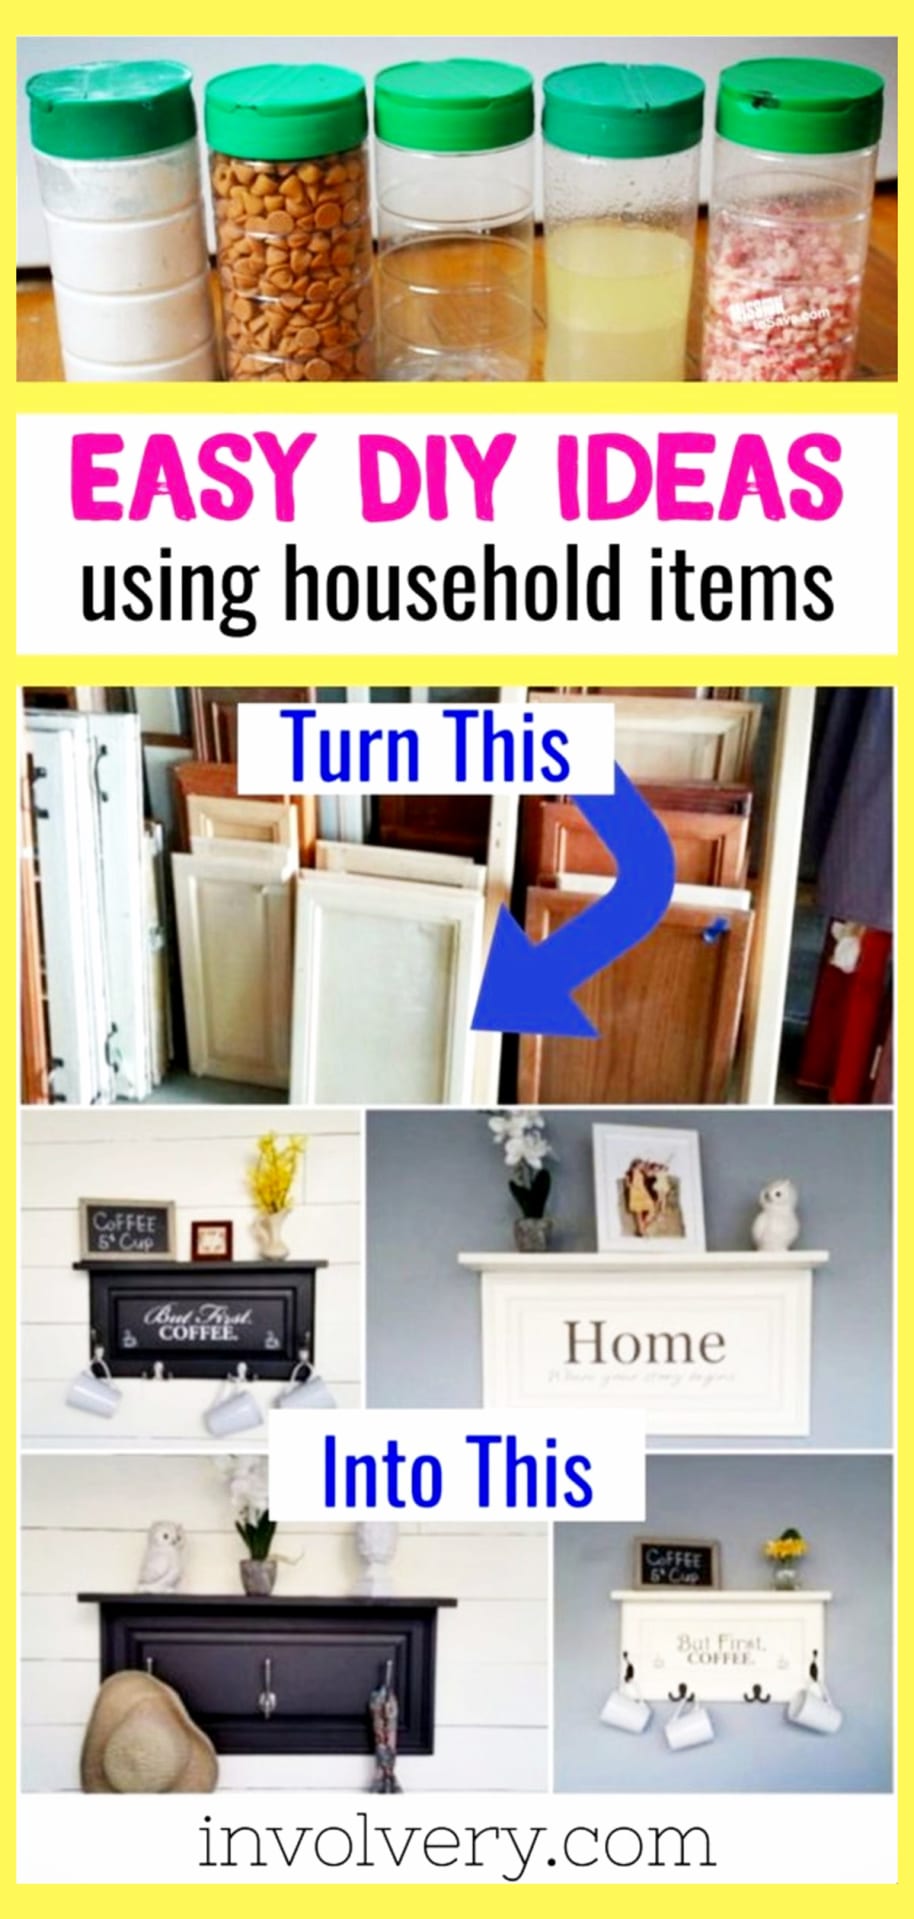 Upcycle crafts and easy DIY decor with household items. Easy DIY that you can do at home - easy DIY that looks hard but is EASY. Repurpose, reuse and recycle in creative ways - awesome and creative reuse ideas upcycling projects and repurposed furniture and home decor projects to make or sell.   Repurposed items before and after ideas for decorating, for yard, for your home and more unique upcycling repurposed items for decorating on a budget